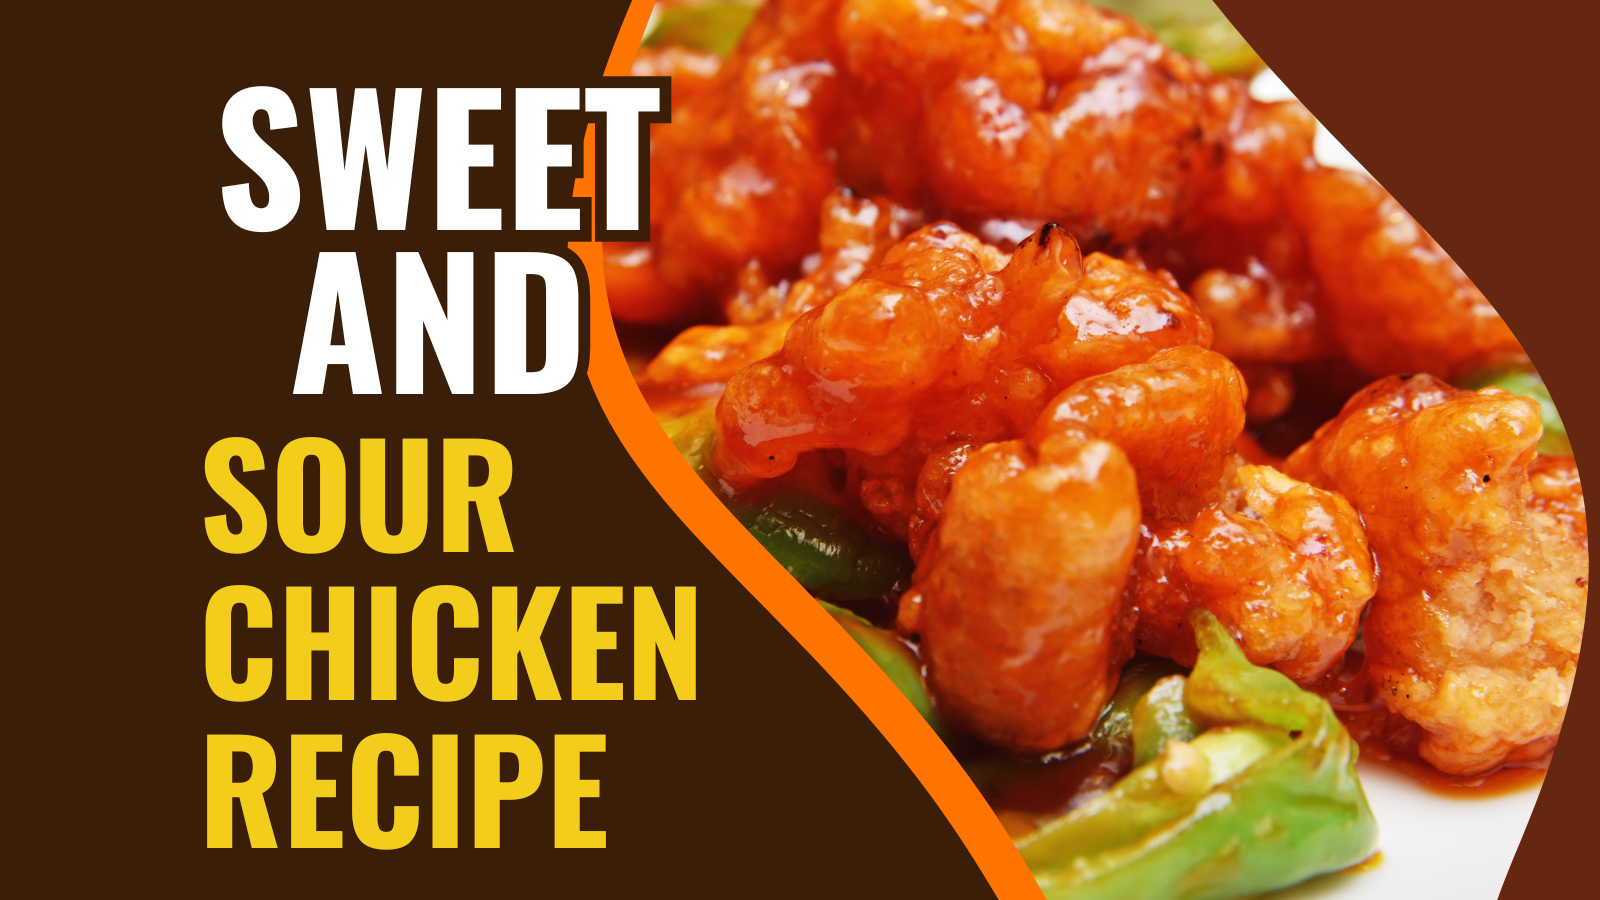 Step-by-Step Guide to Making Sweet and Sour Chicken